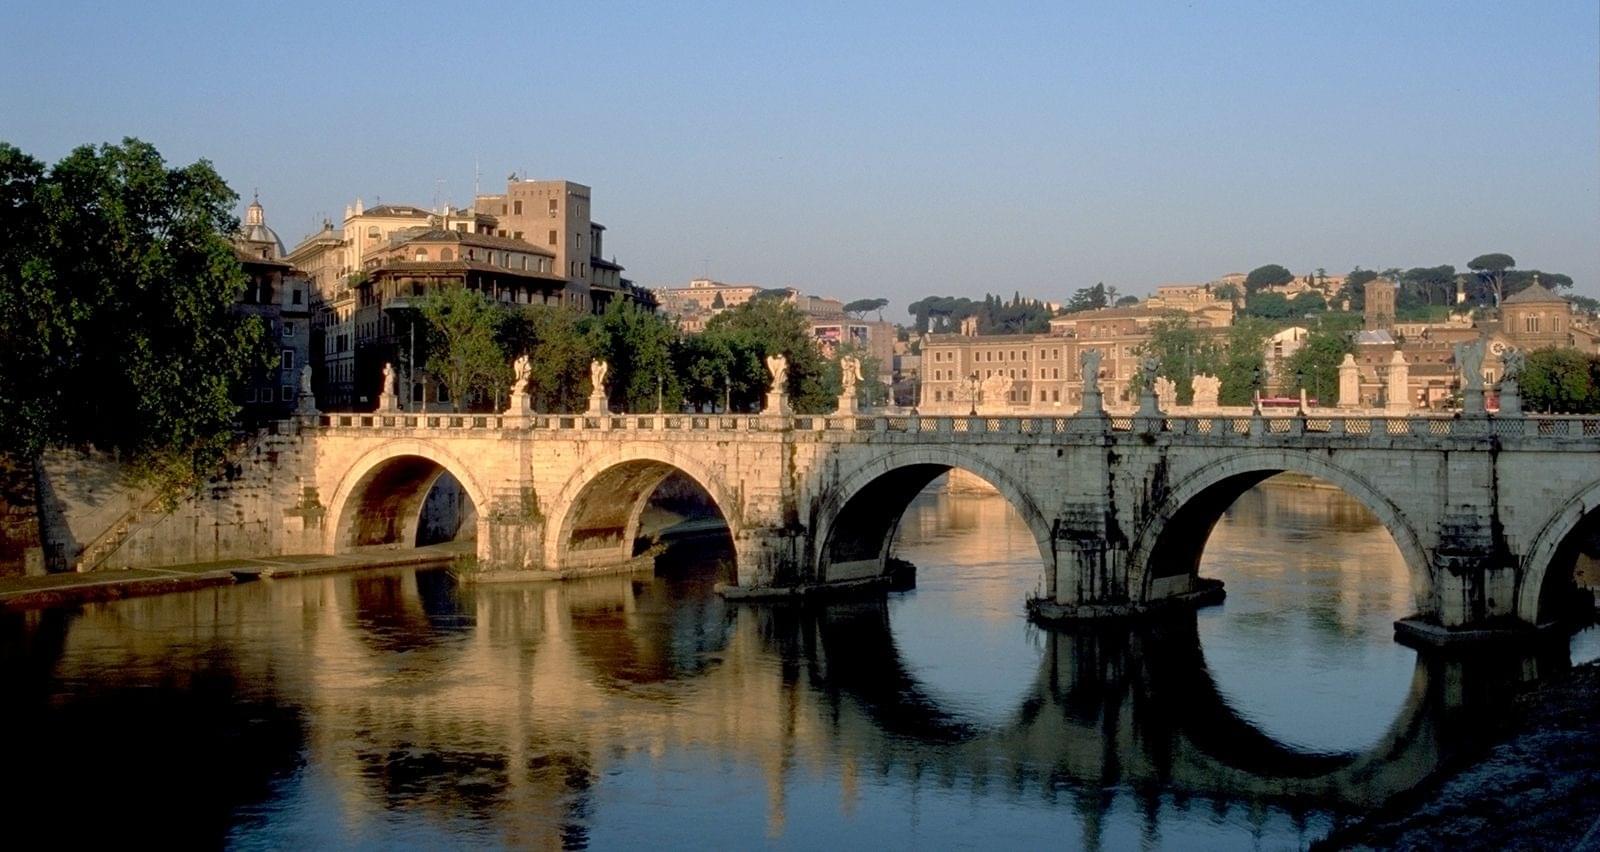 Tiber River Overview